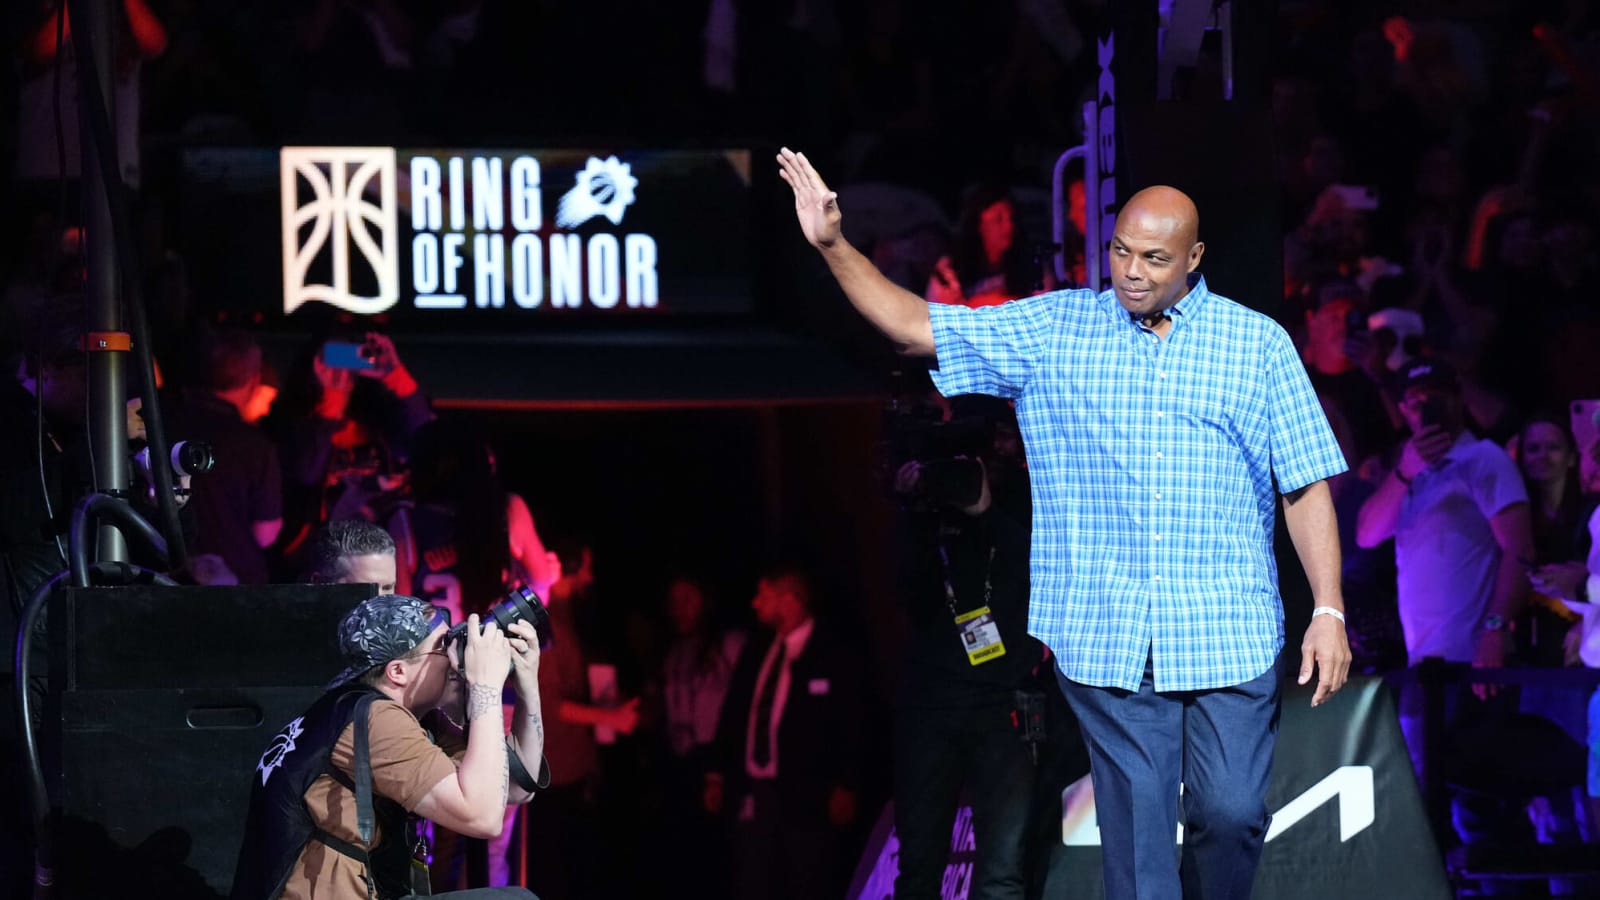 NBA News: Charles Barkley Shares 1 Shocking Truth About Being a Black Public Figure